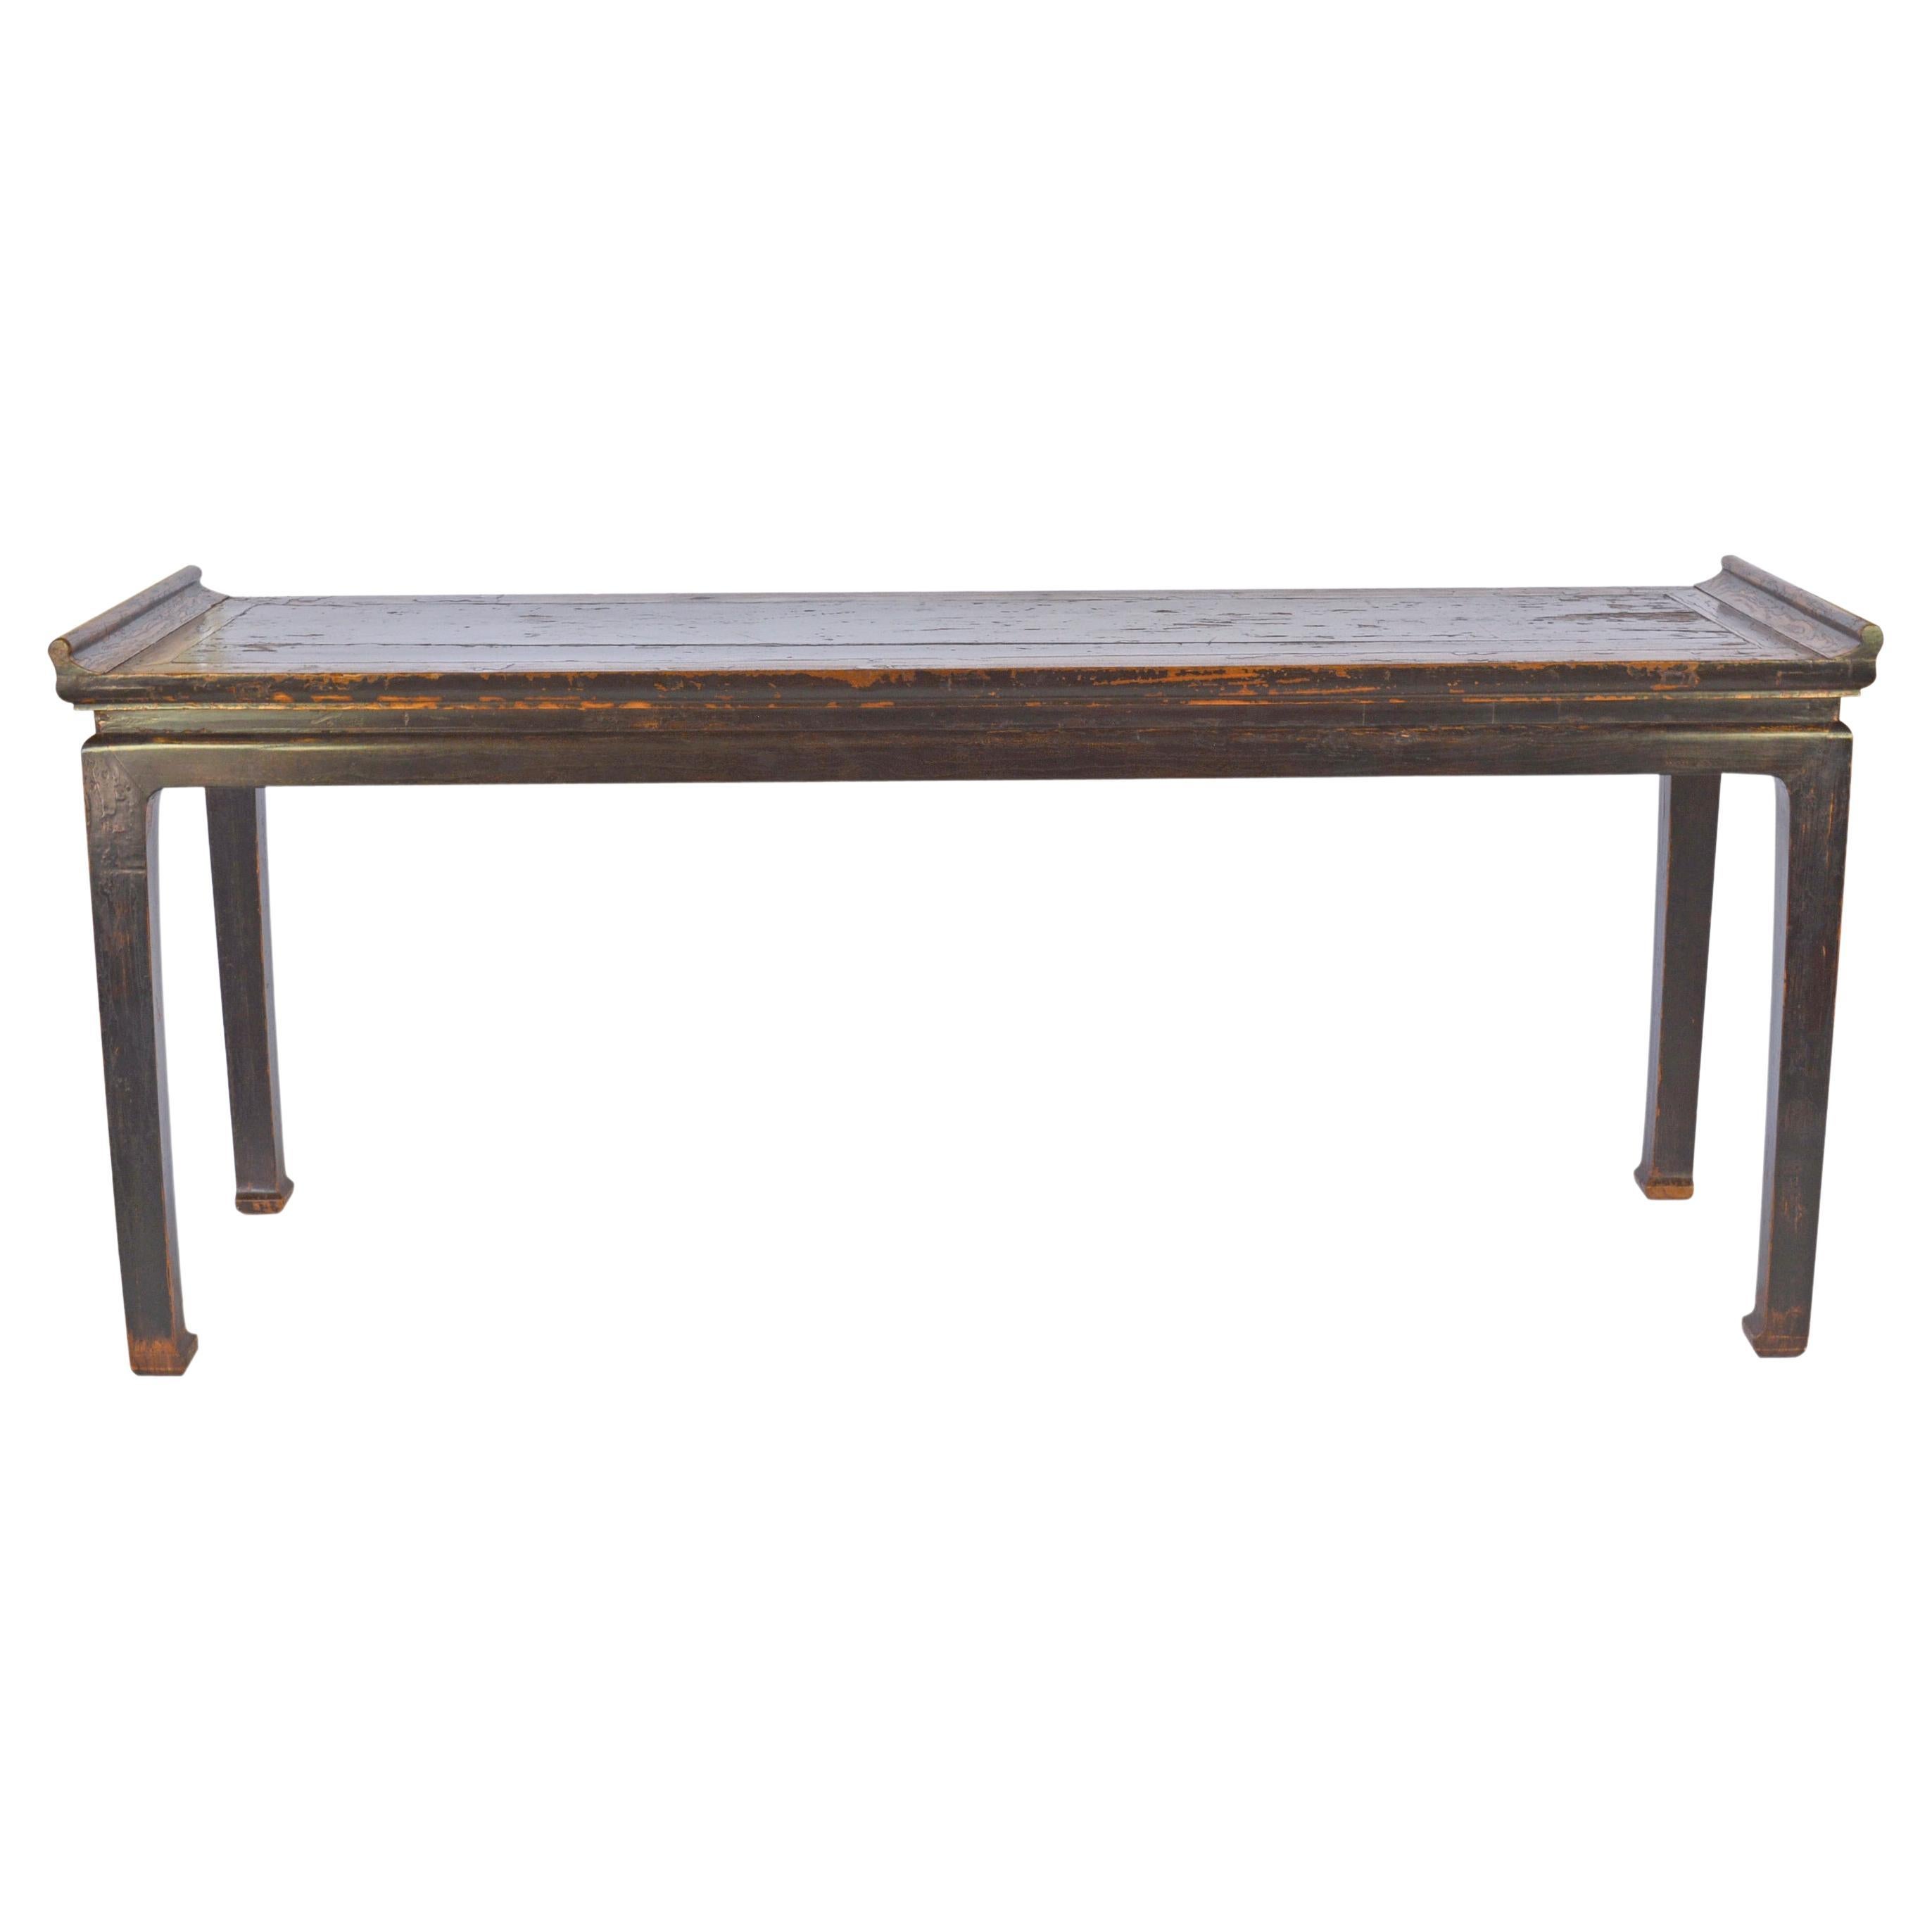 18th Century Black Lacquer Painting Table